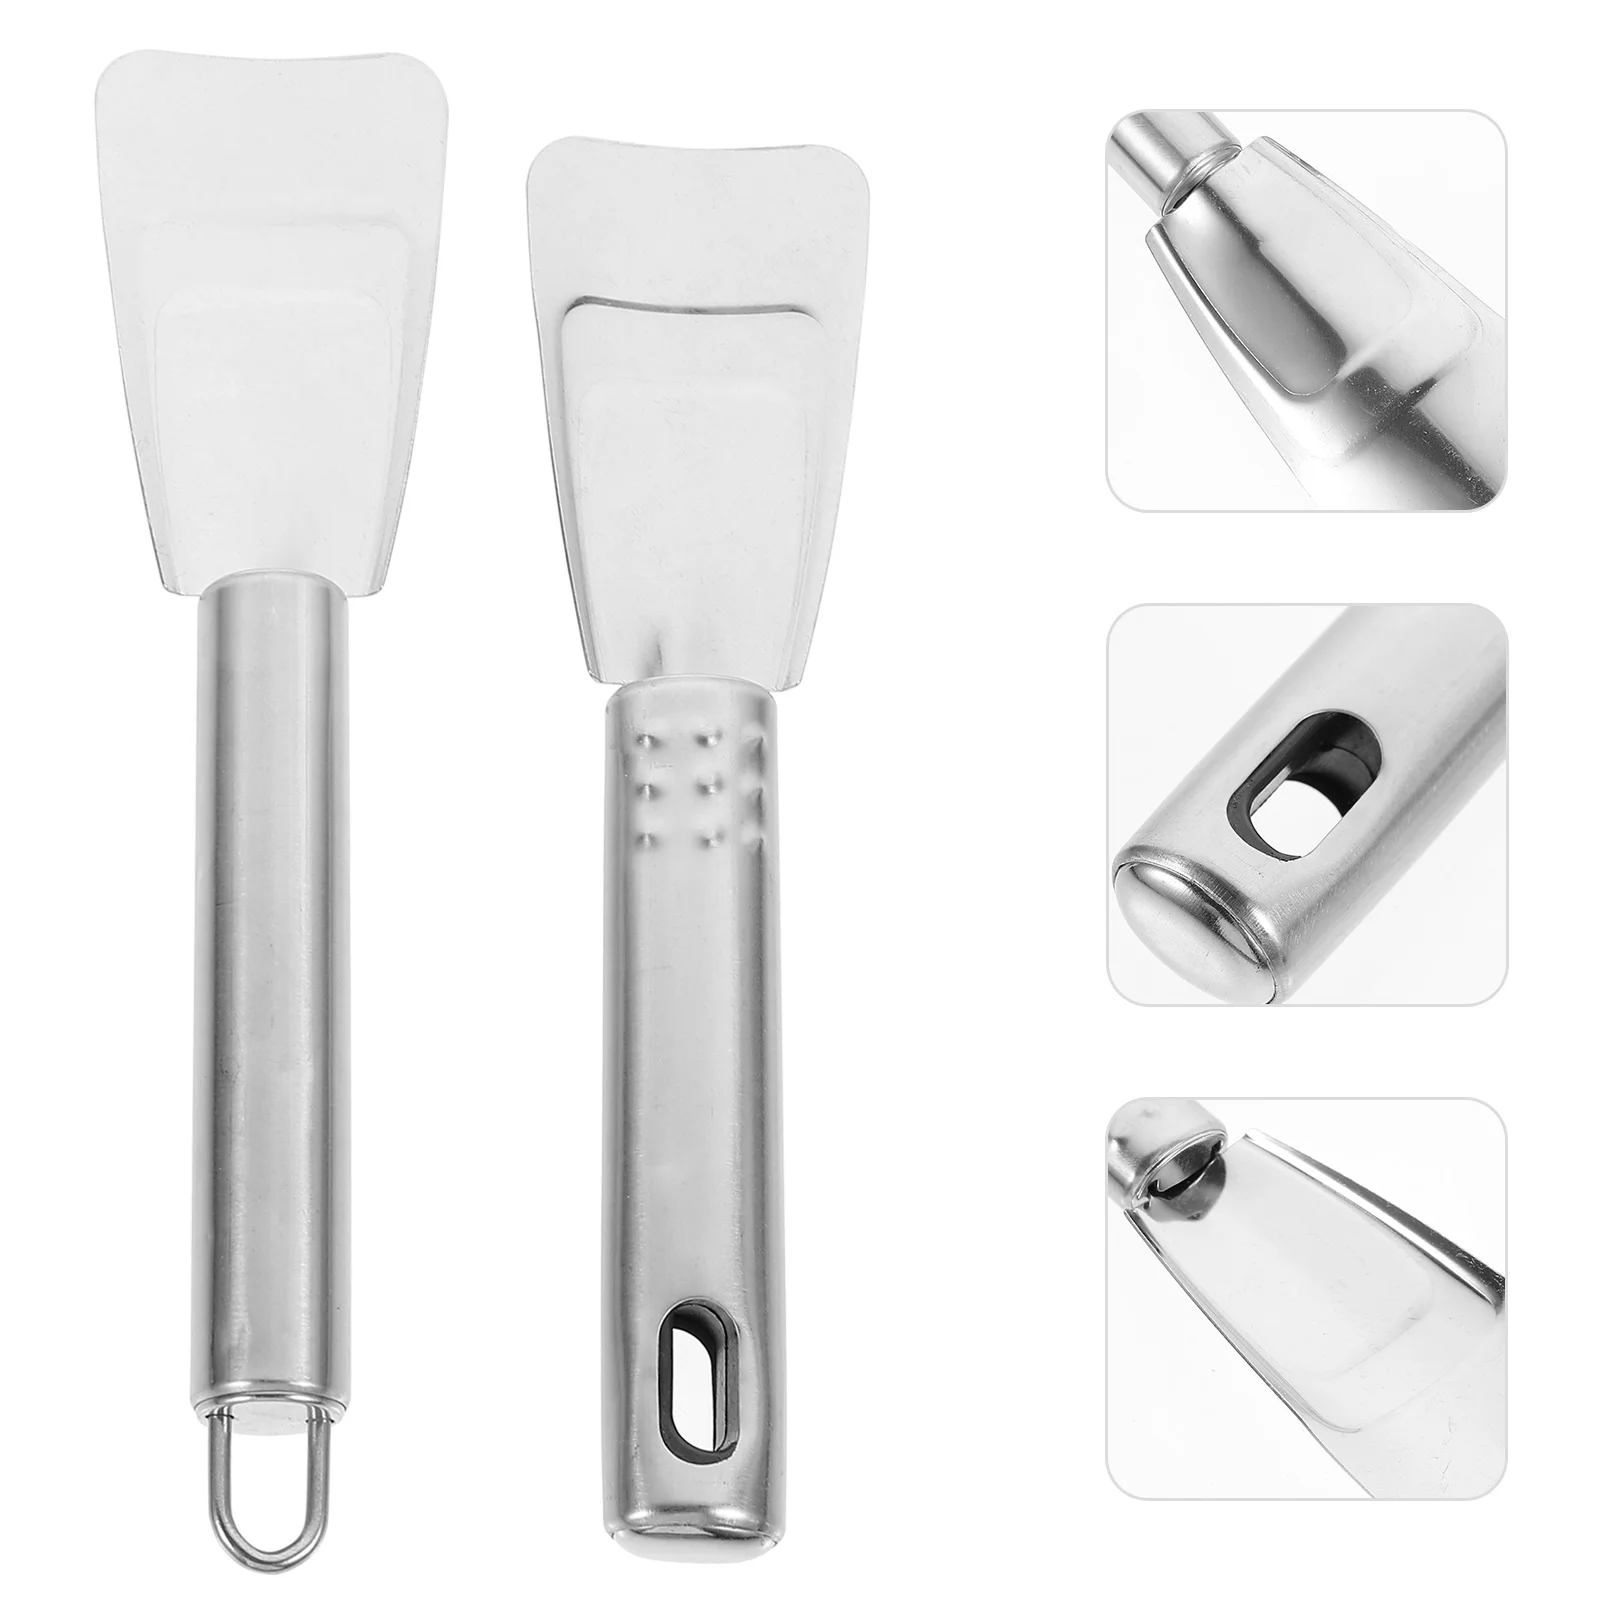 

6 Pcs Stainless Steel Ice Deicing Tool Home Scraper Freezer Removal Scoop Handheld Refrigerator Defroster